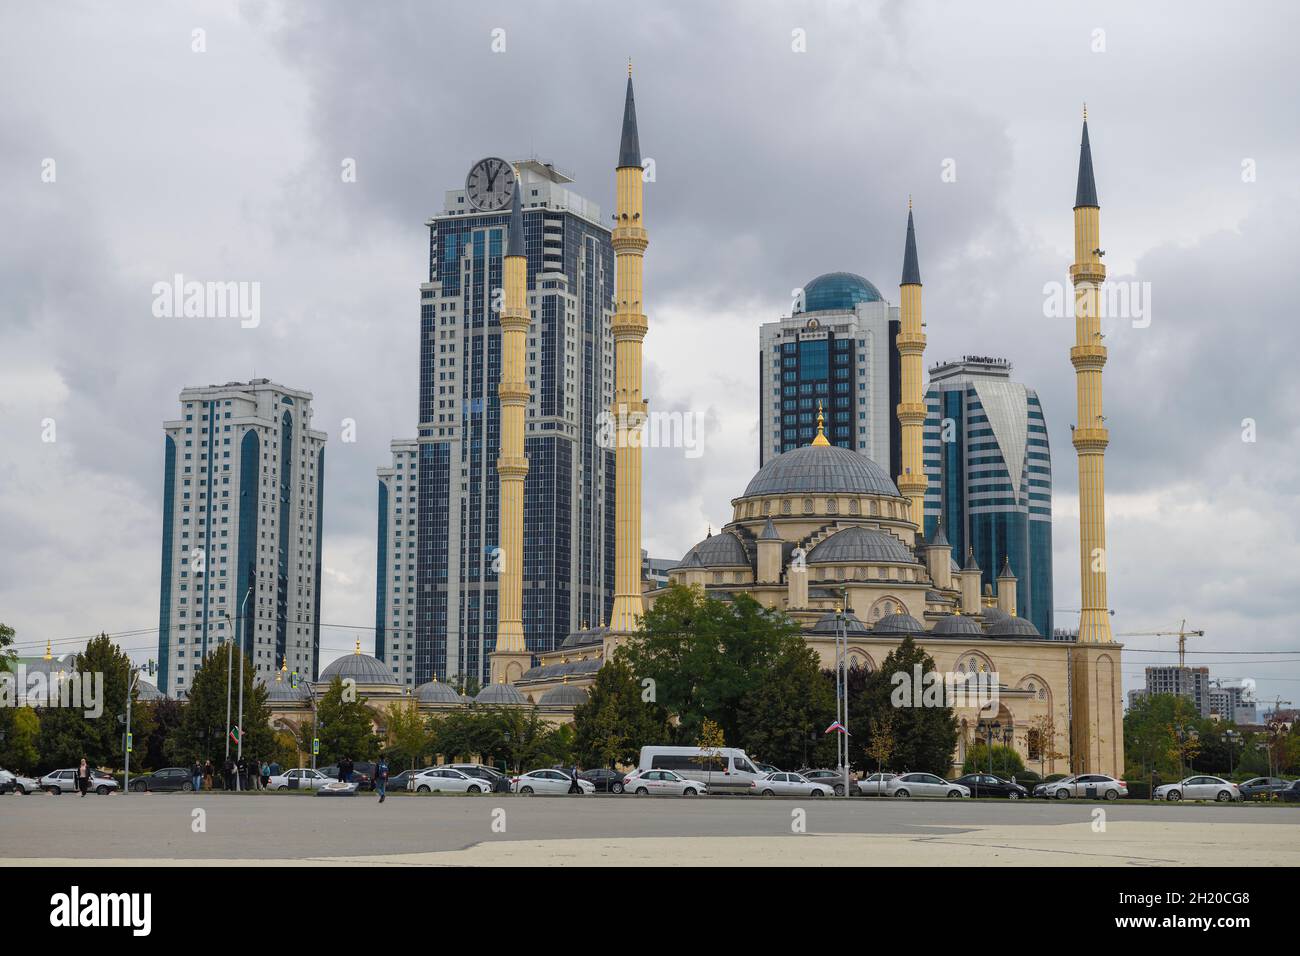 GROZNY, RUSSIA - SEPTEMBER 29, 2021: The Heart of Chechnya Mosque in front of the Grozny City high-rise complex on a cloudy September day Stock Photo